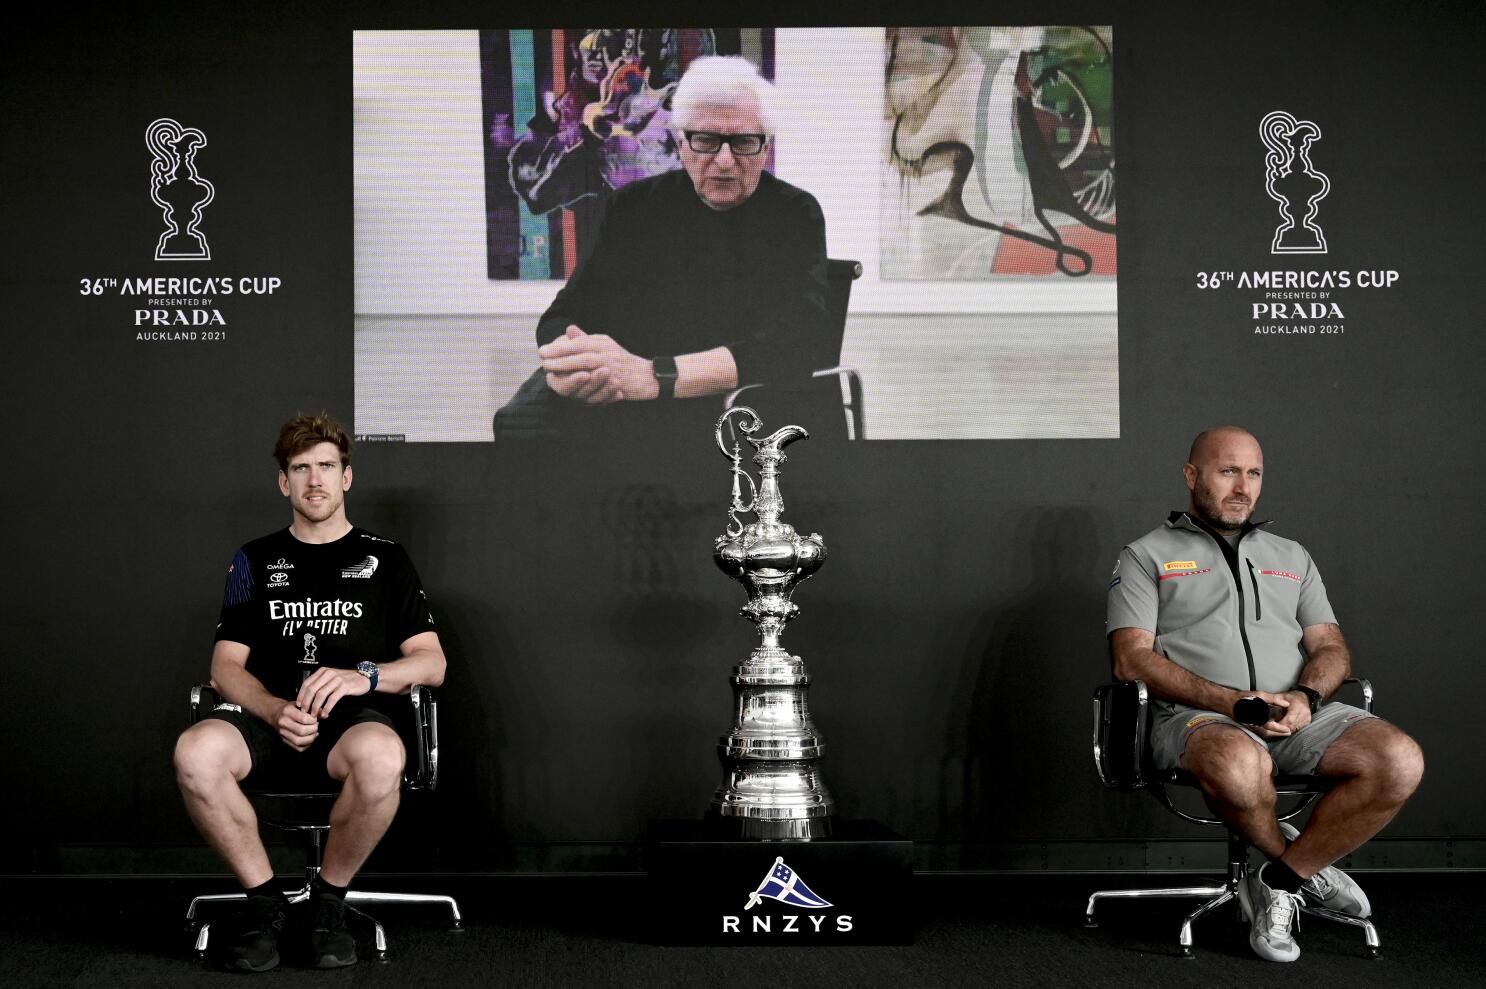 The Louis Vuitton Cup Trophy is displayed during a news conference